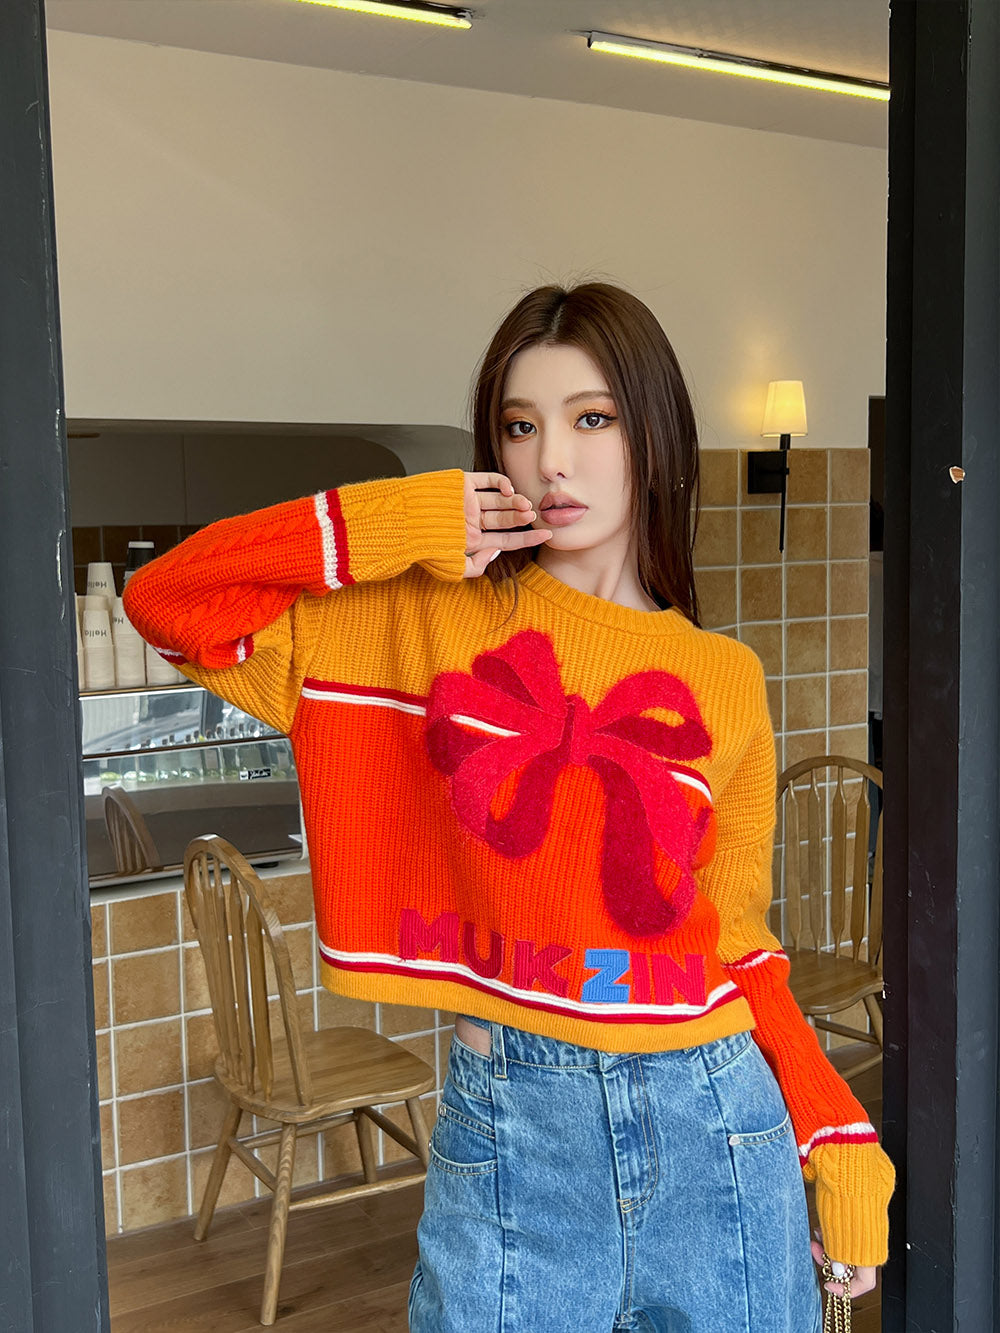 MUKZIN Bowknot Ginger and Red Color Blocking Sweater